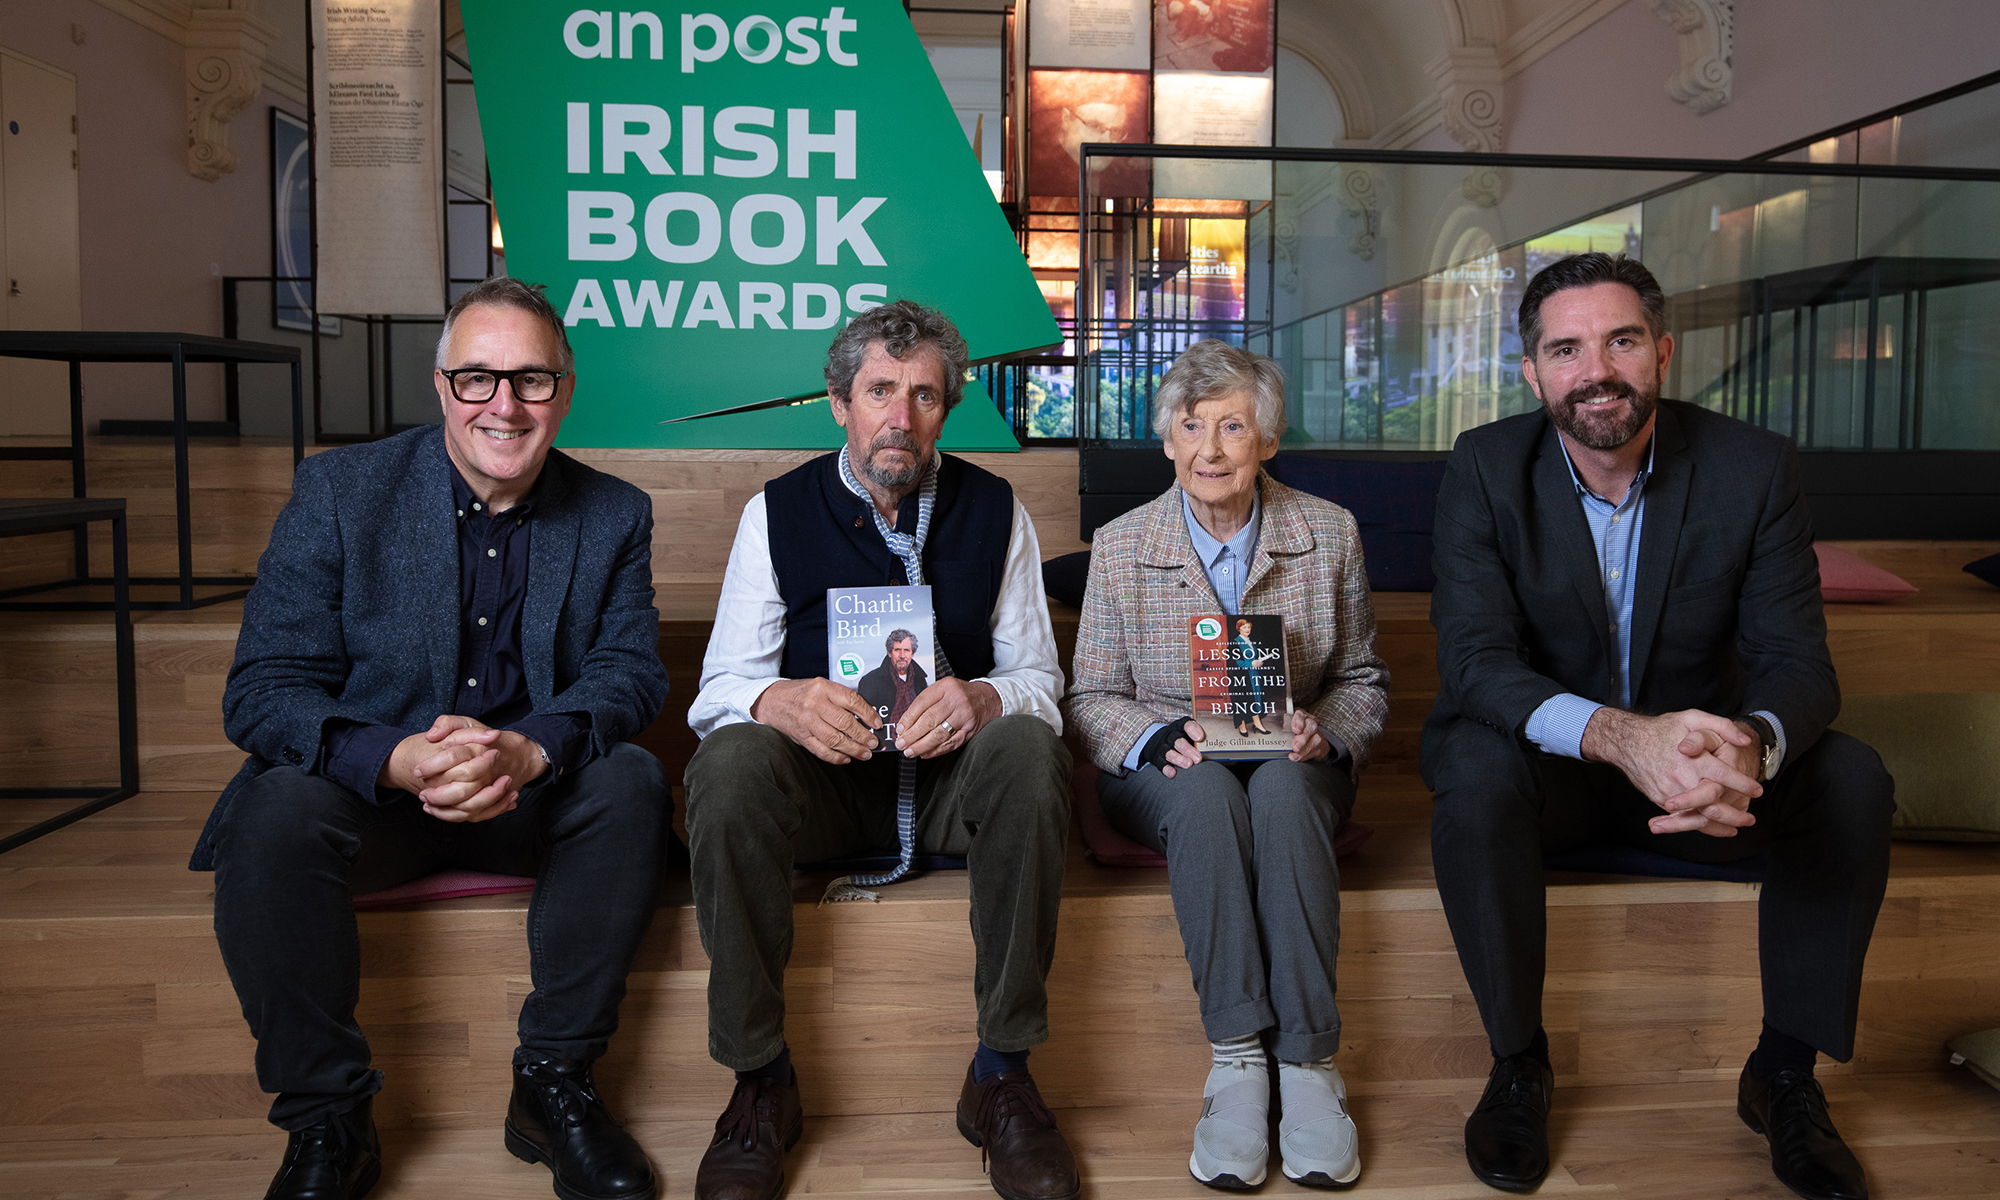 An Post CEO, David McRedmond and An Post Irish Book Awards Chairperson, Brendan Corbett sit with shortlisted authors Charlie Bird and Judge Gillian Hussey at the Museum of Literature Ireland.